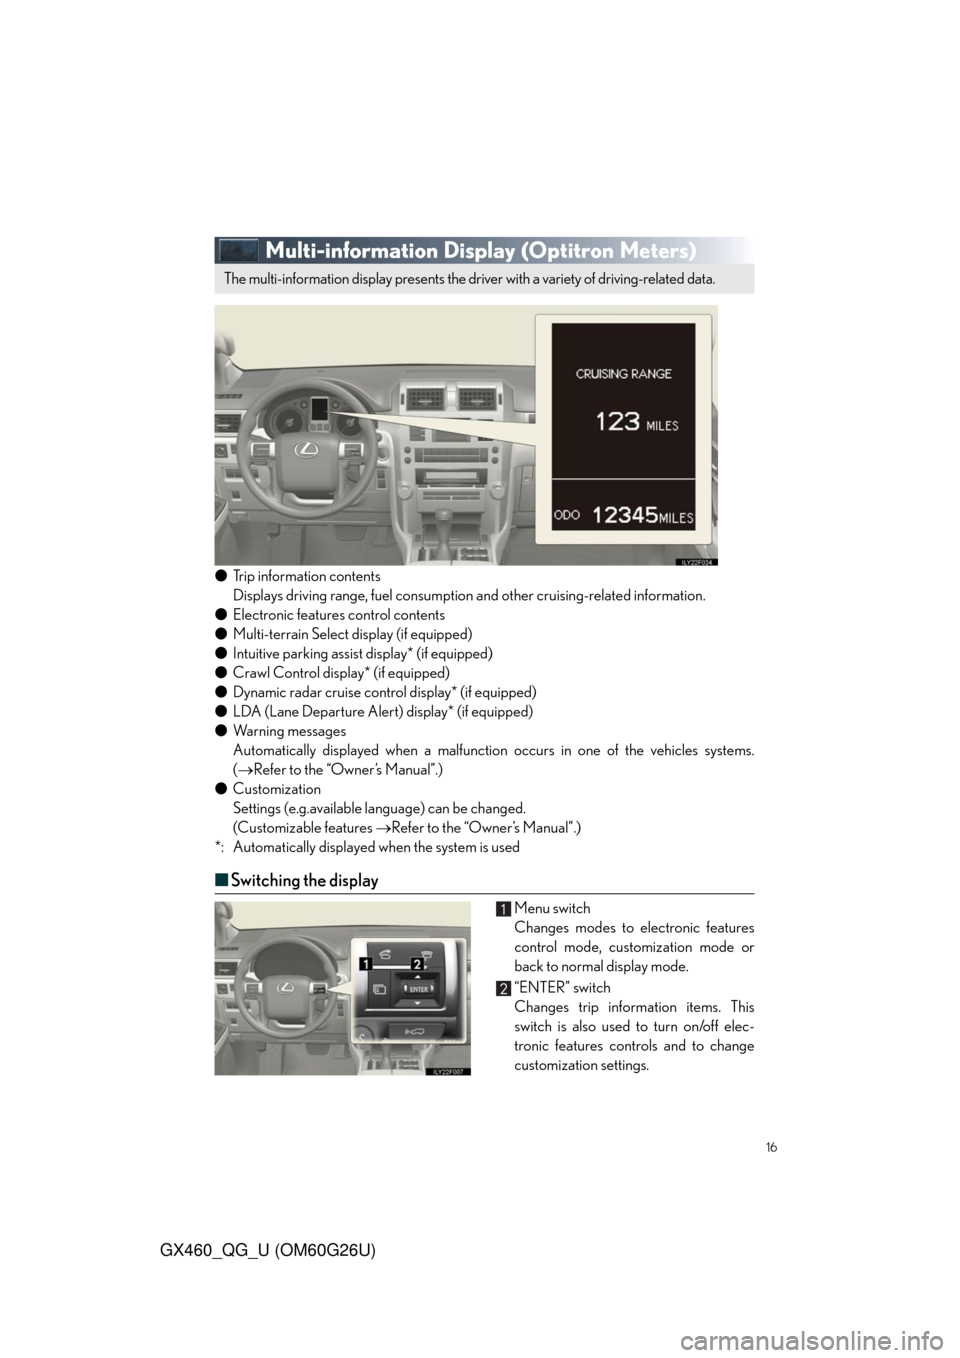 Lexus GX460 2011  Operating Other Driving Systems / LEXUS 2011 GX460 OWNERS MANUAL QUICK GUIDE (OM60G26U) 16
GX460_QG_U (OM60G26U)
Multi-information Display (Optitron Meters)
●Trip information contents
Displays driving range, fuel consumption and other cruising-related information.
●Electronic feature